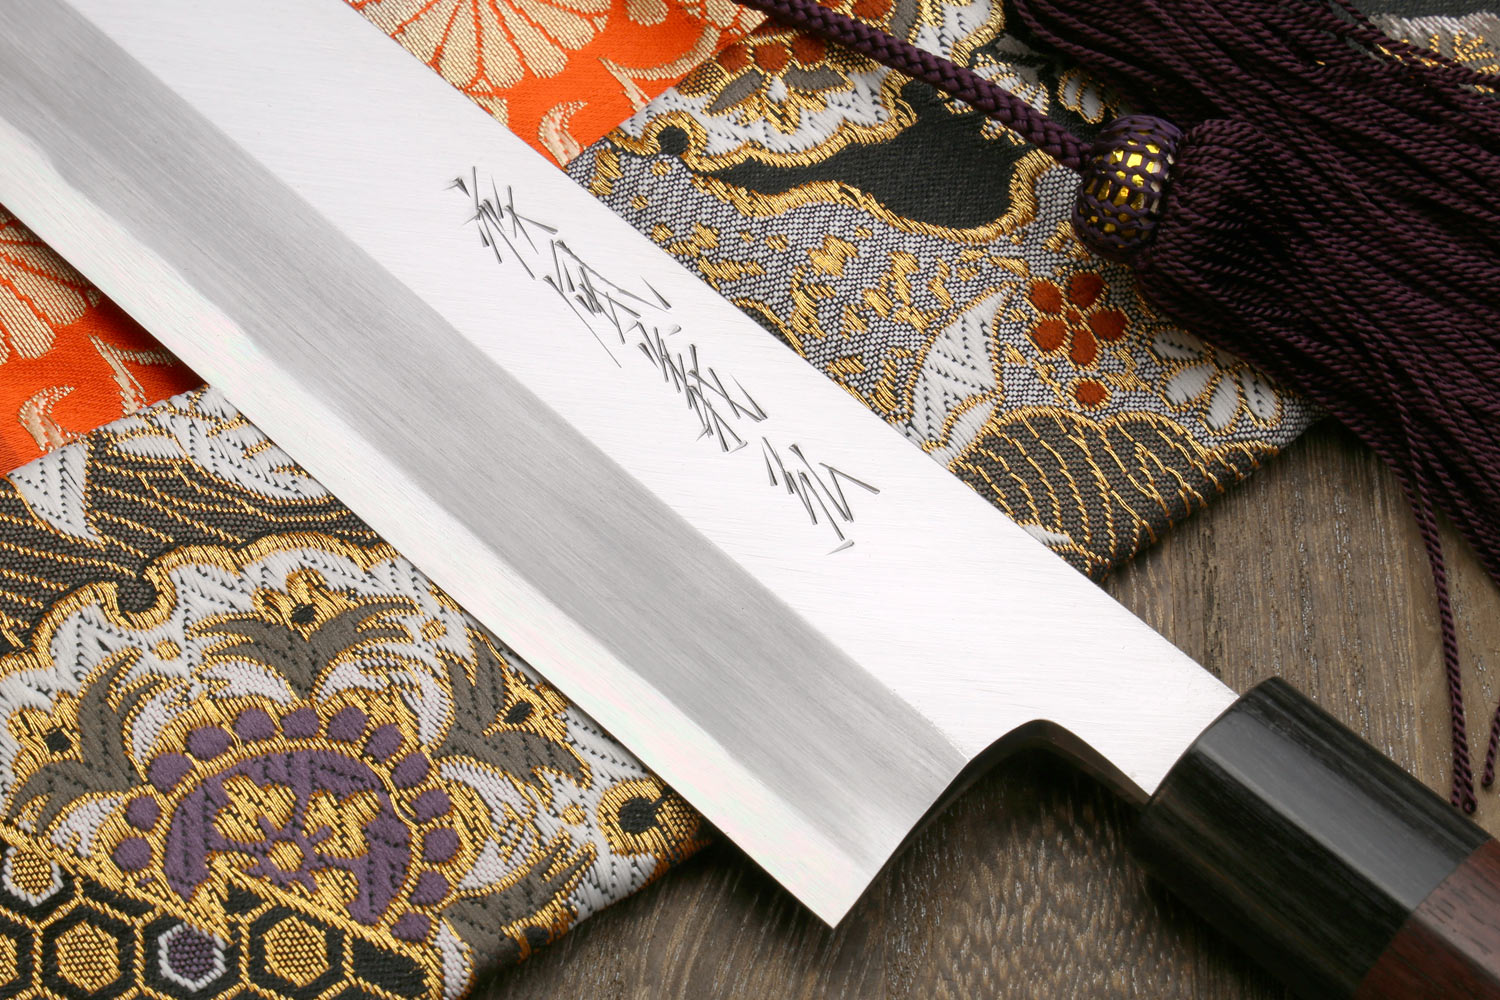 Your Guide to Japanese Knives • Just One Cookbook